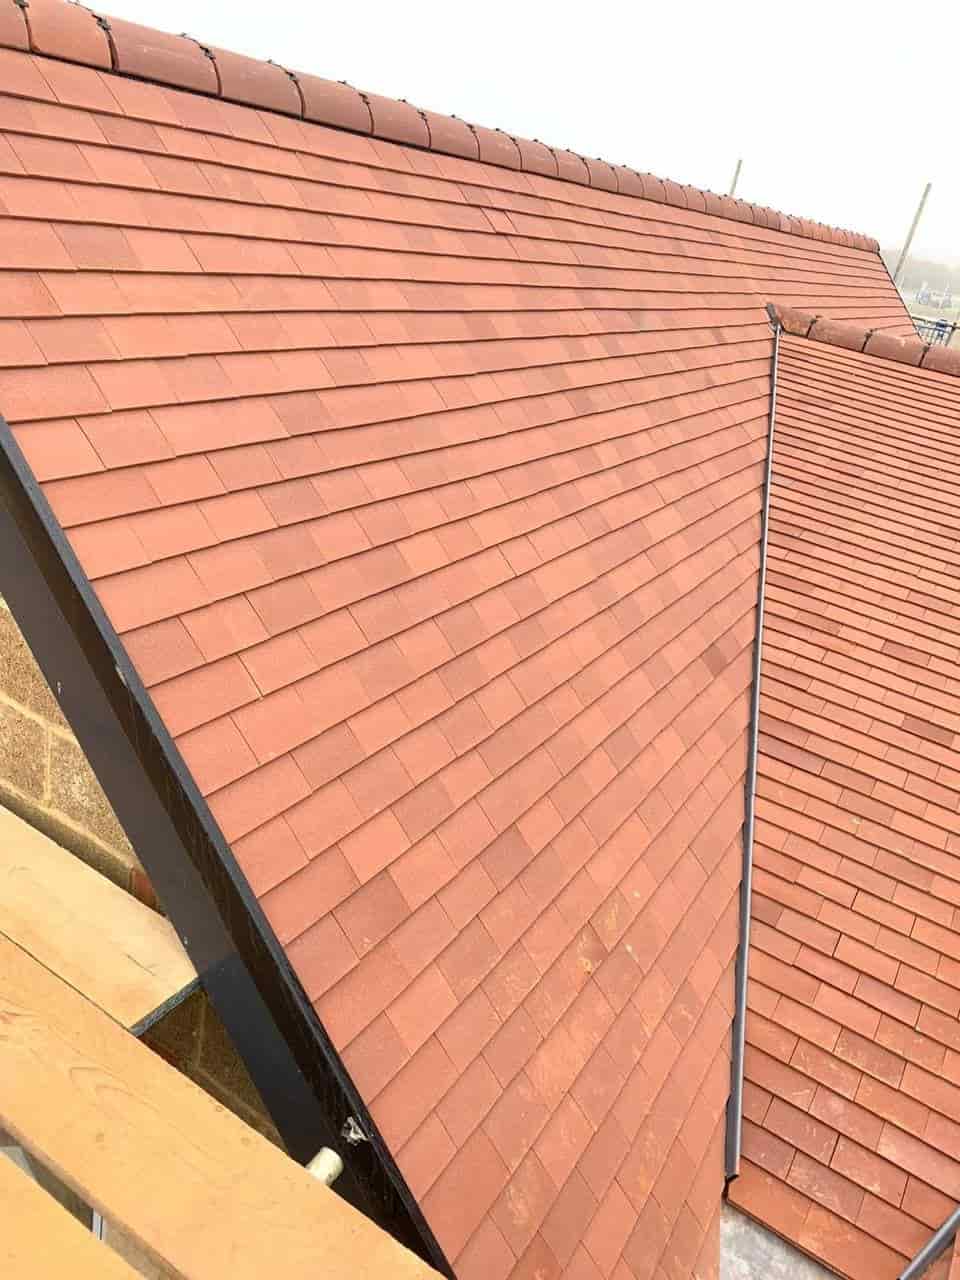 This is a photo of a new build roof installed in Sevenoaks, Kent. Installation carried out by Sevenoaks Roofers